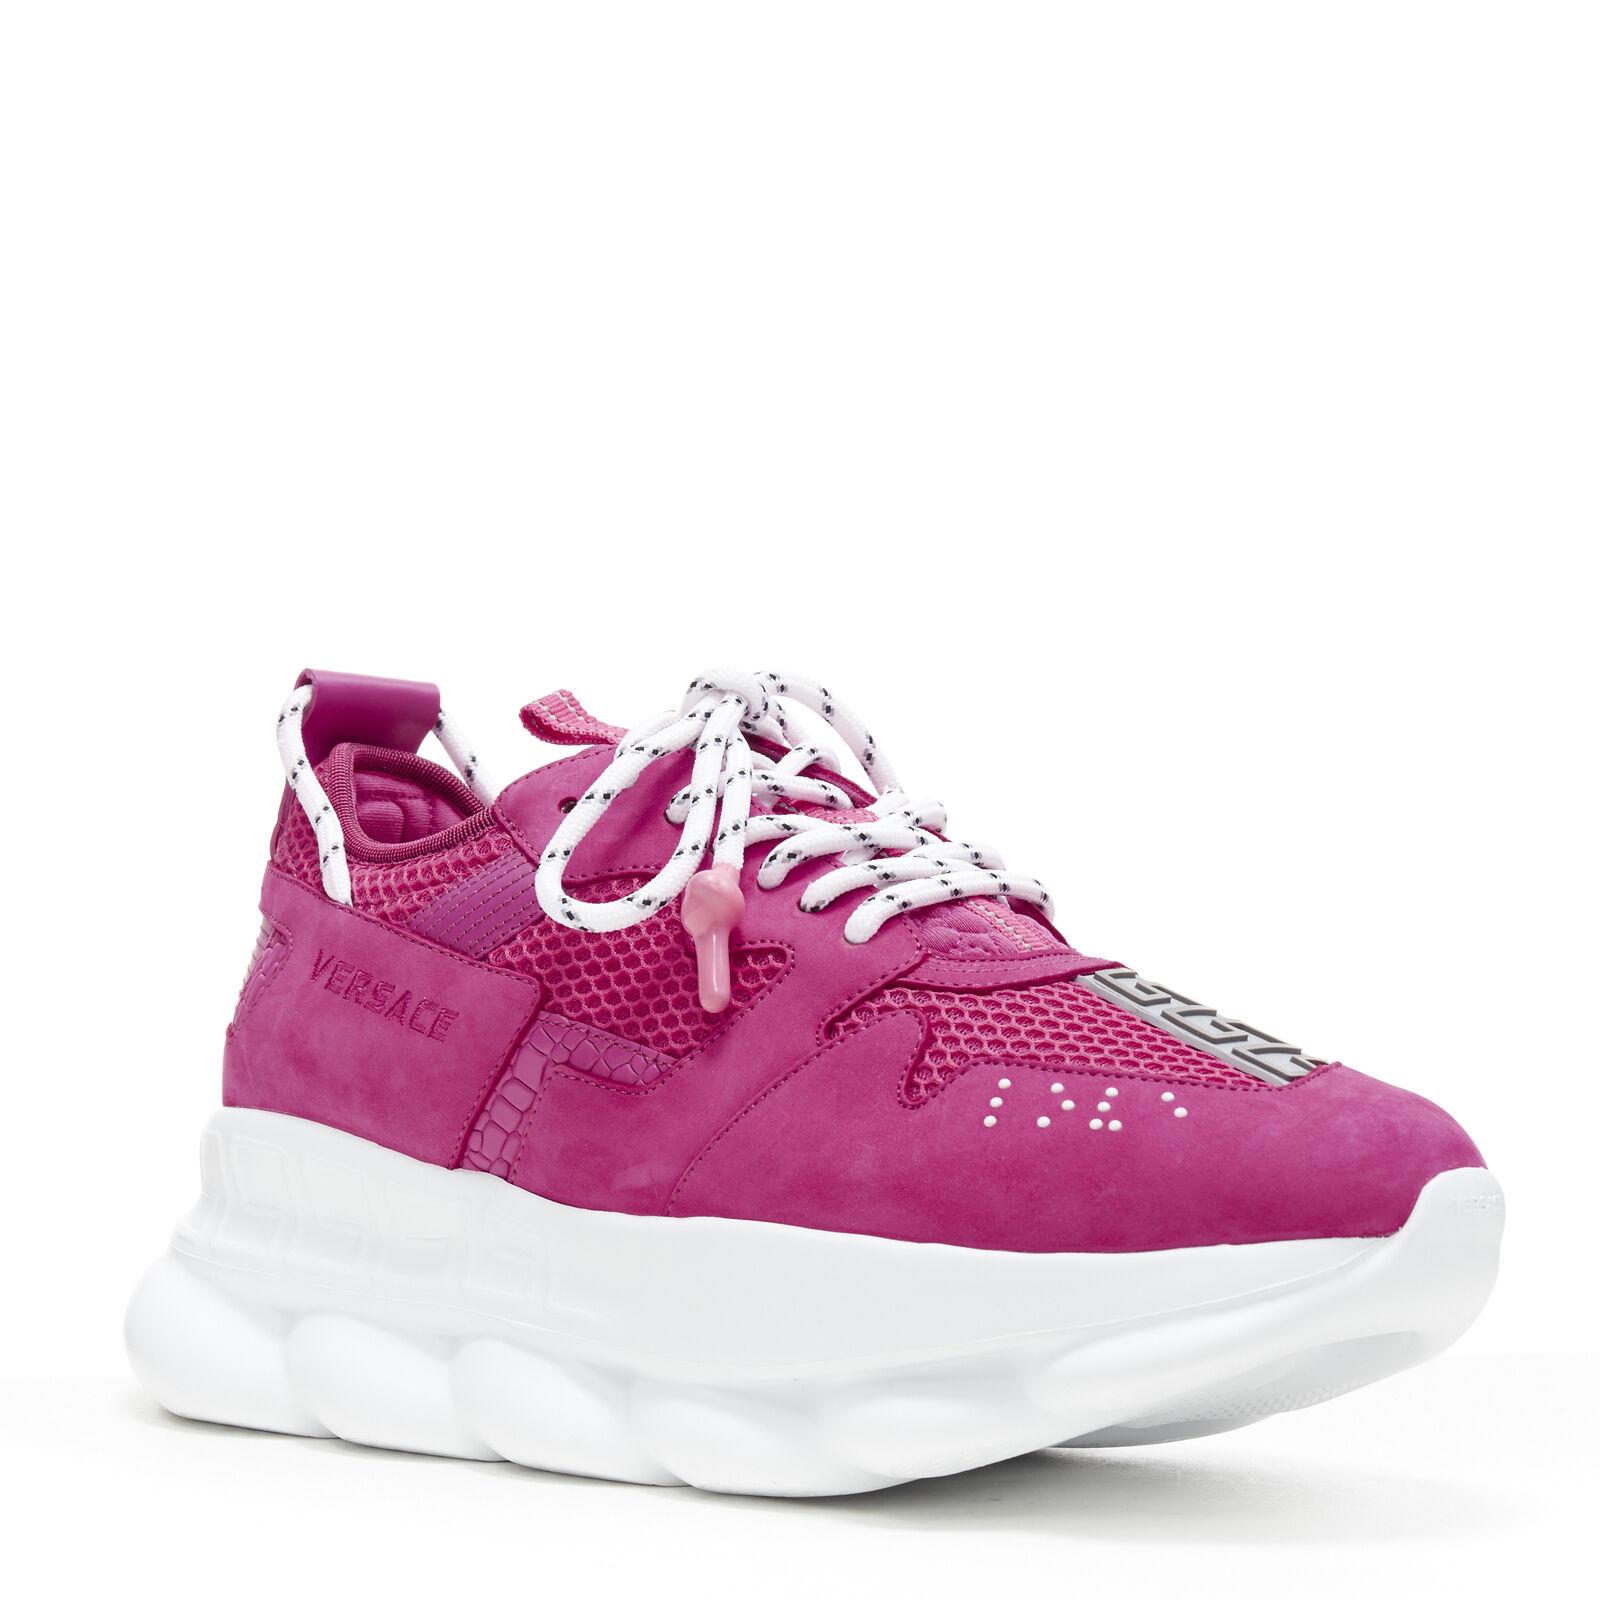 new VERSACE Chain Reaction Blowzy all pink suede low top chunky sneaker EU42
Reference: TGAS/B01166
Brand: Versace
Designer: Donatella Versace
Model: Versace Chain Reaction
Material: Fabric, Leather
Color: Pink
Pattern: Solid
Closure: Lace